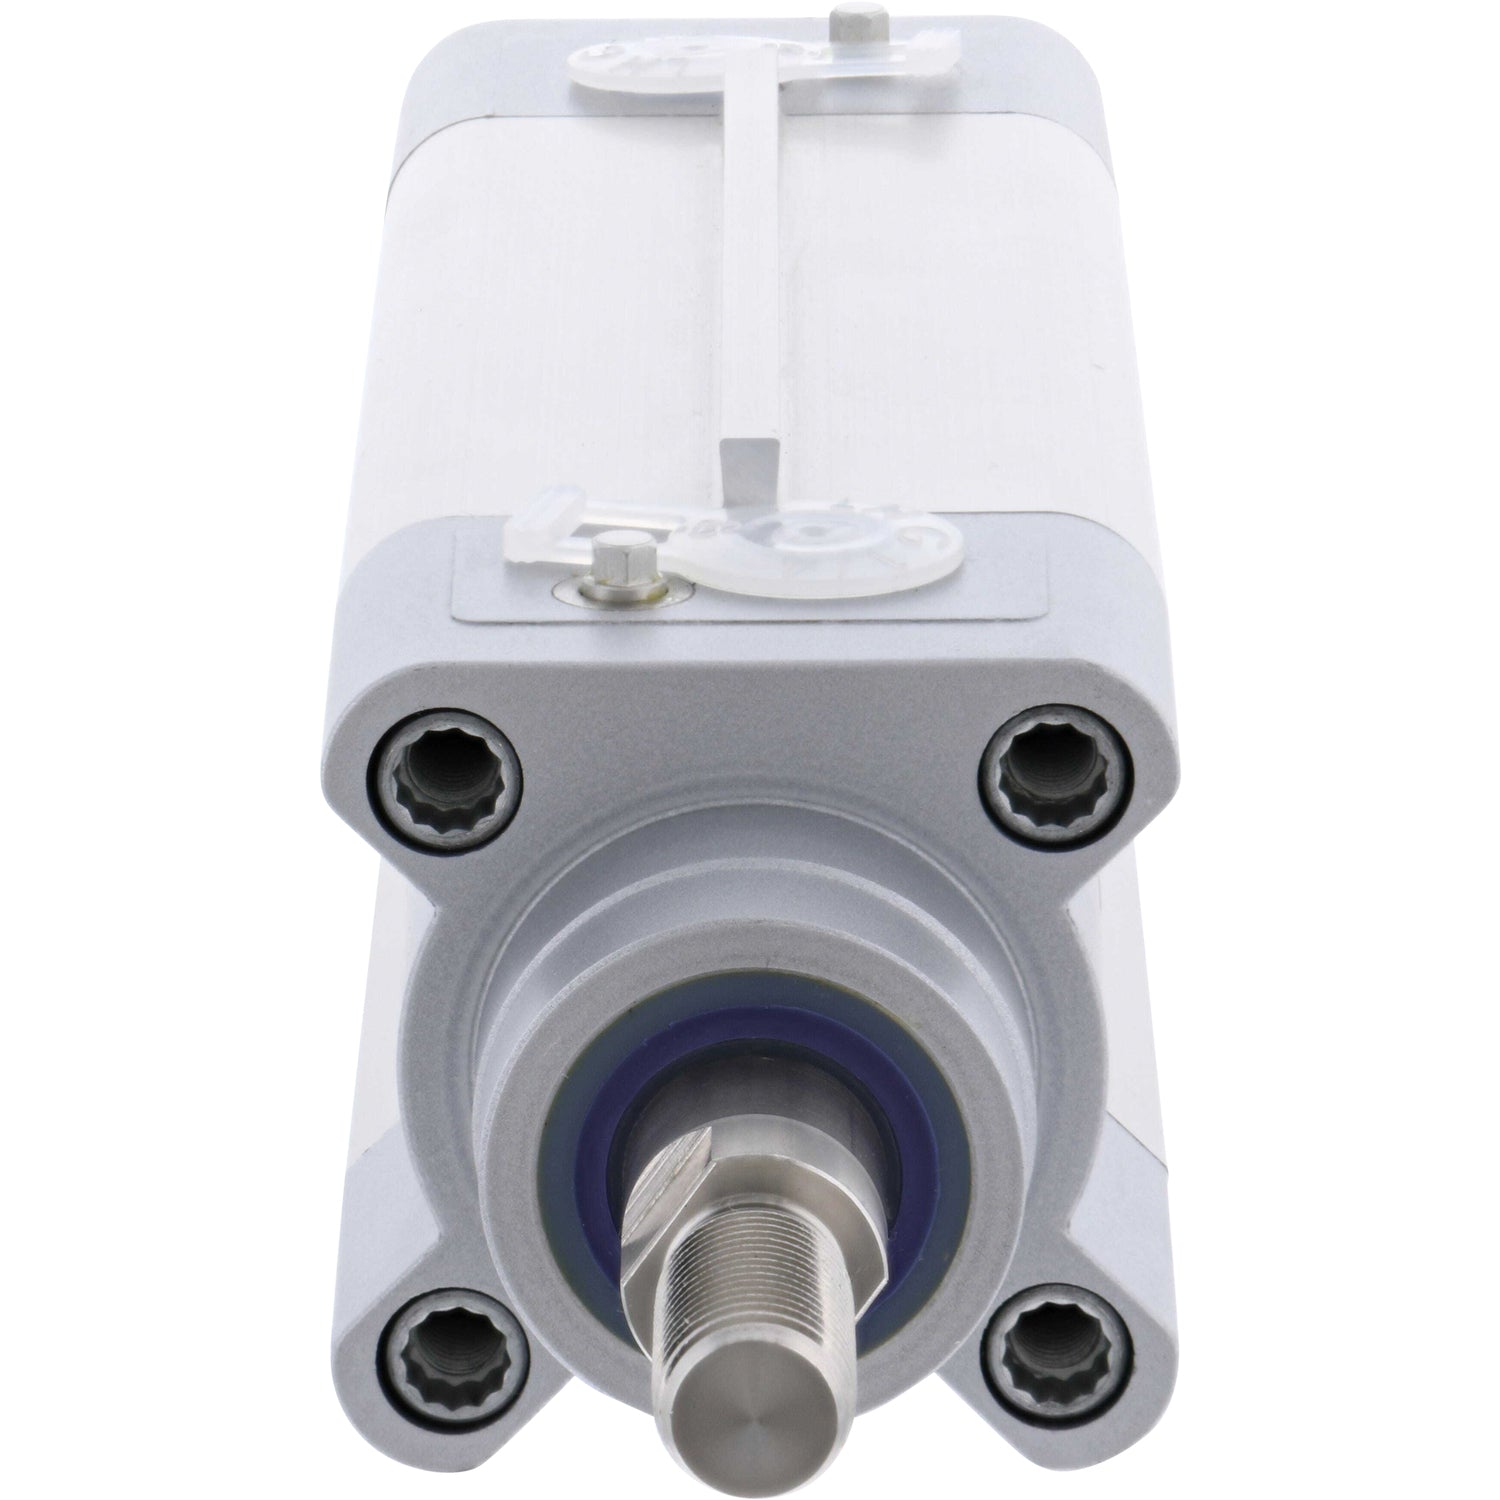 Pneumatic cylinder on white background. Cylinder's threaded rod and seal are shown. 570078 DSBF-C-40-70-PPVA-A3-10E-R